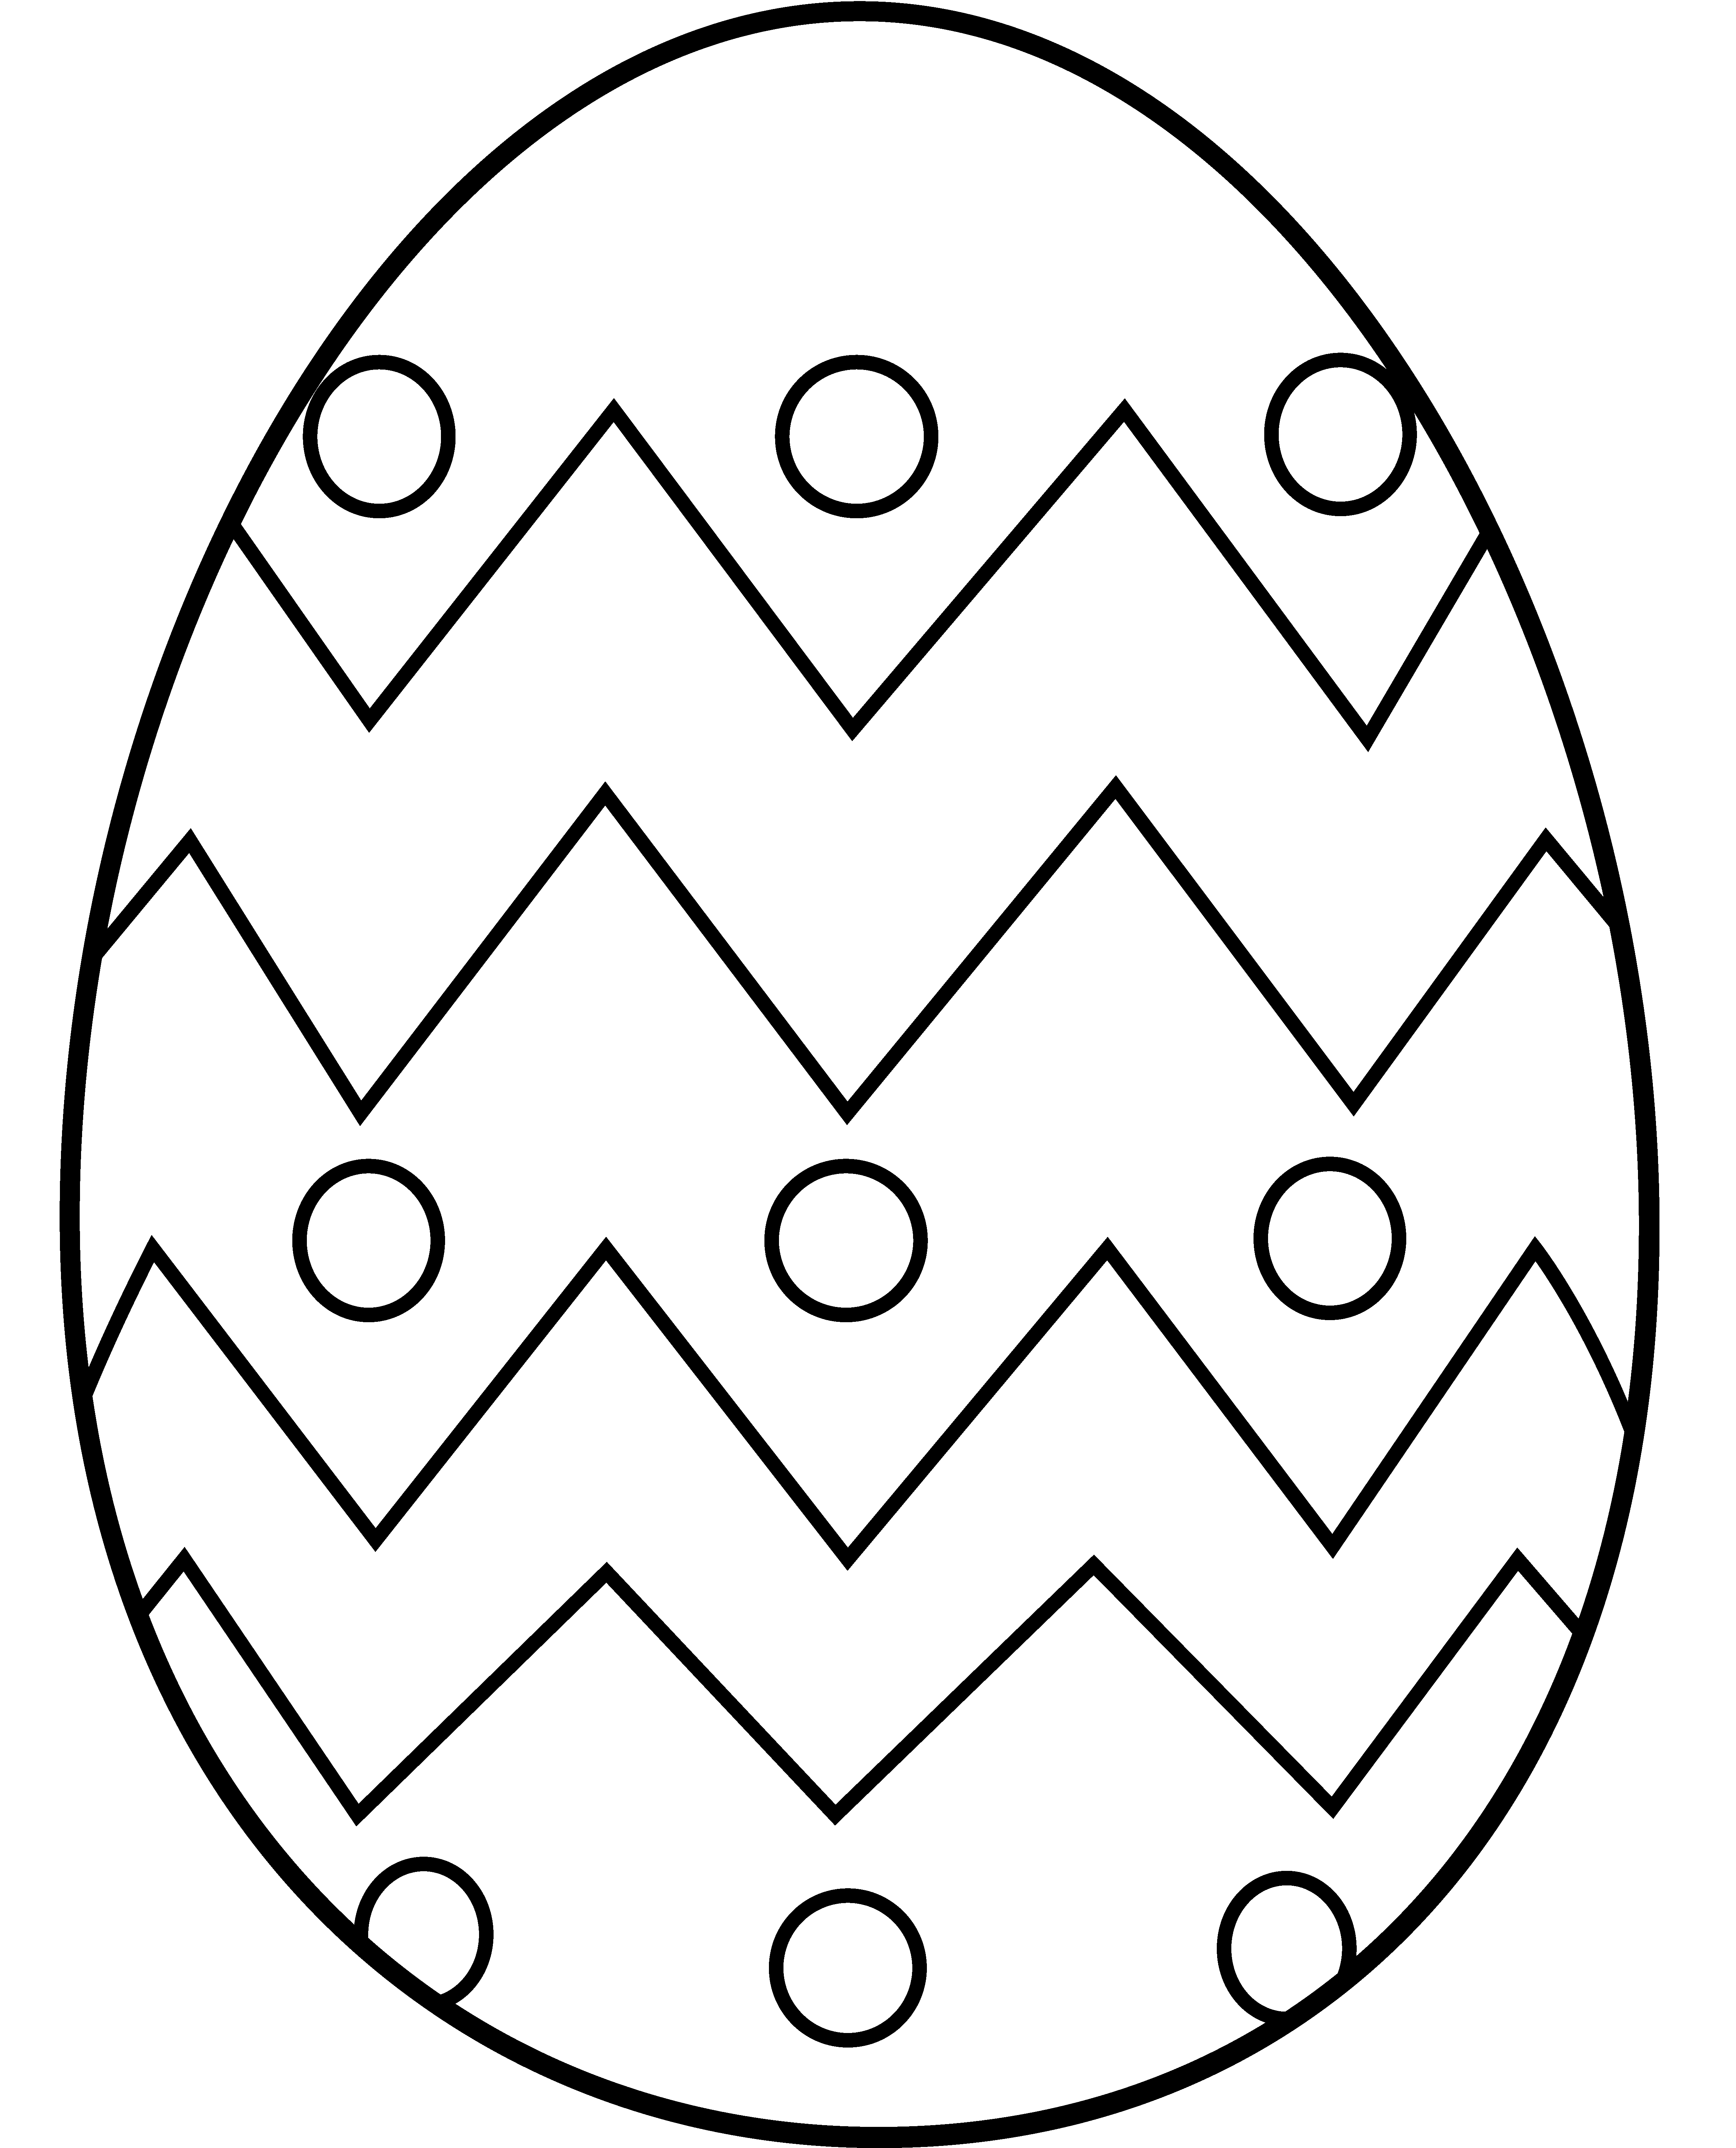 egg clipart coloring